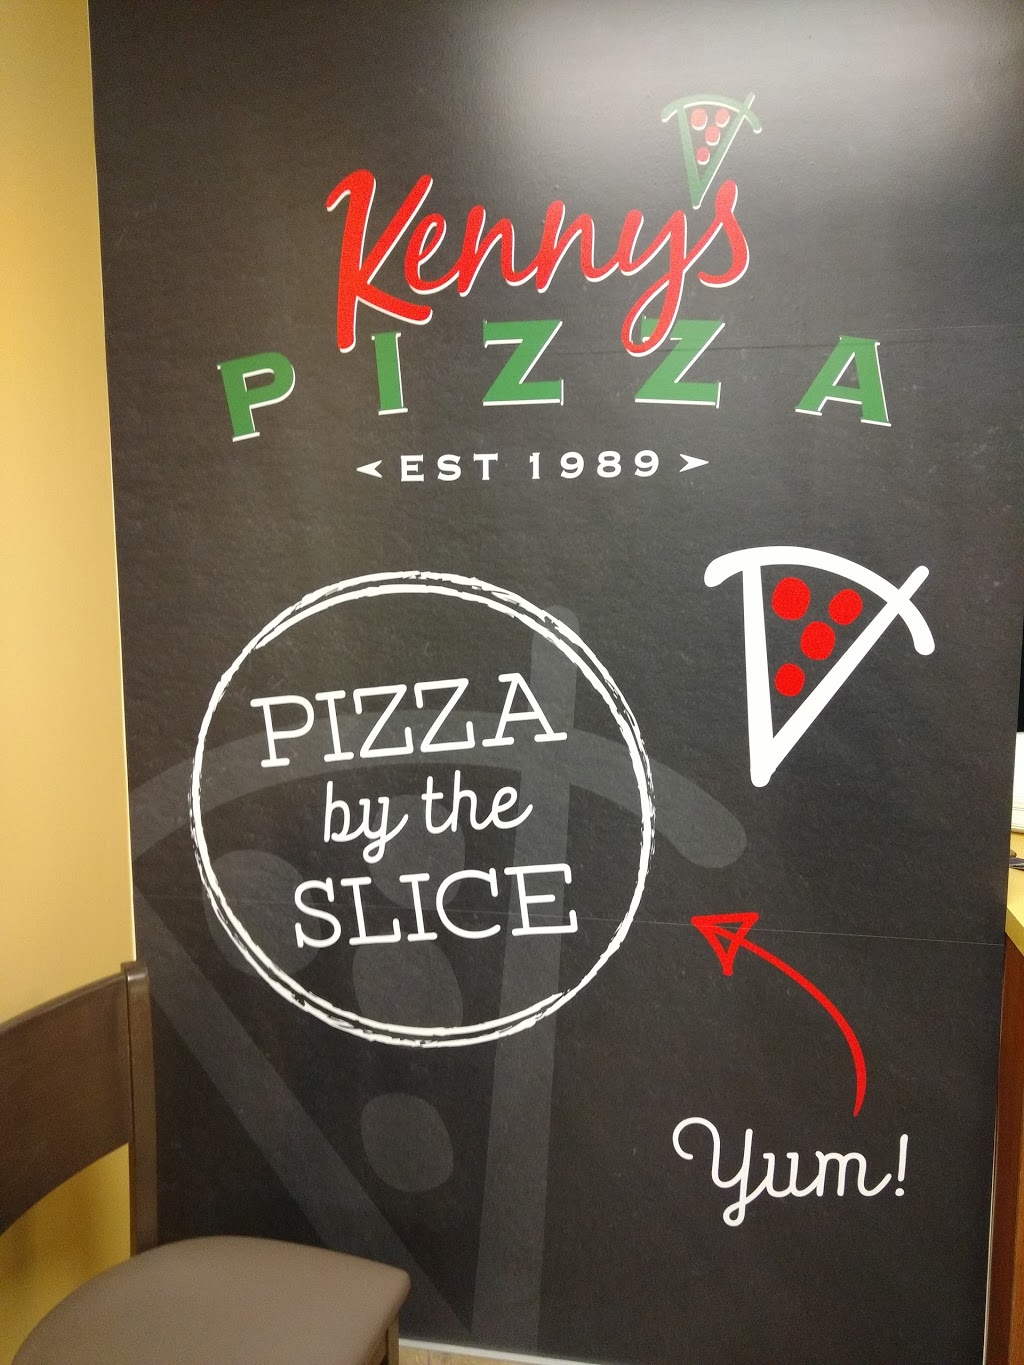 Kennys Pizza Cole Harbour | 1038 Cole Harbour Rd, Dartmouth, NS B2V 1E7, Canada | Phone: (902) 466-9222